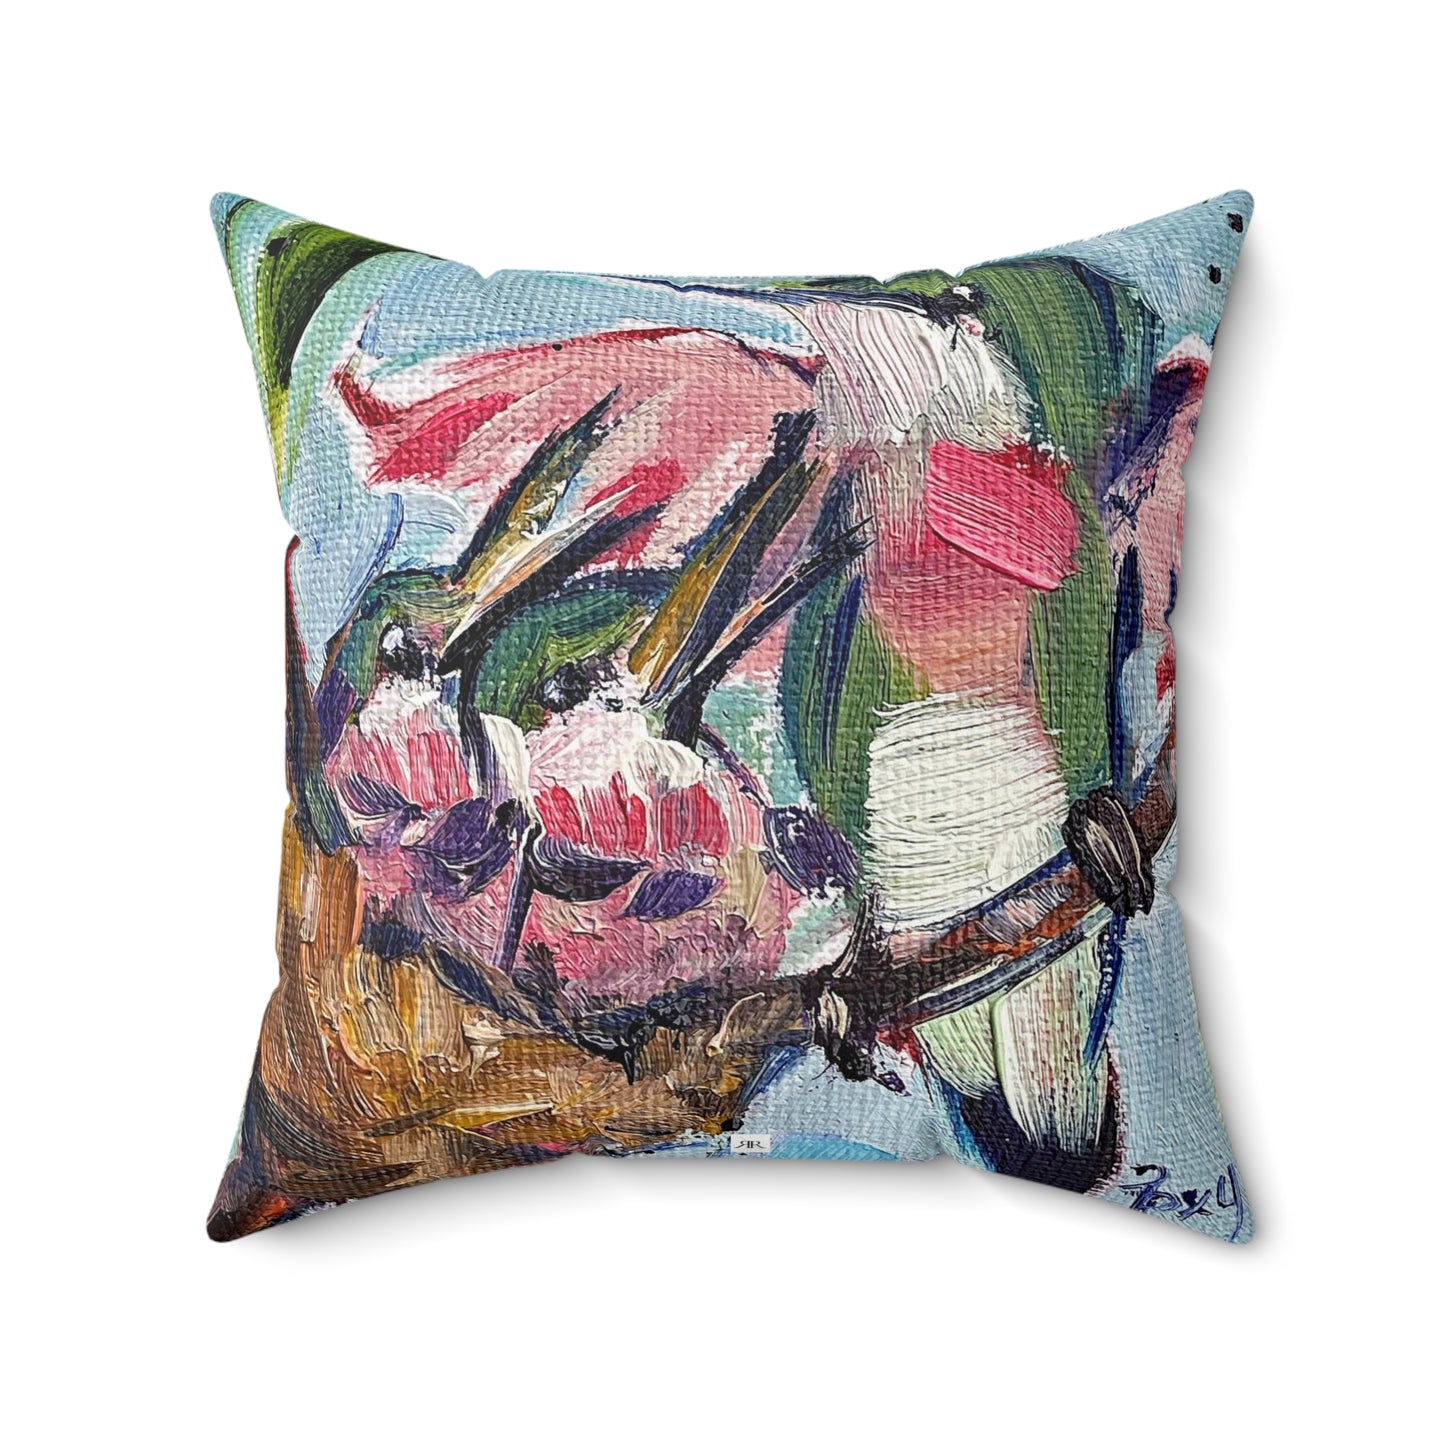 Hungry Hummers (Hummingbird at Nest with Babies) Indoor Spun Polyester Square Pillow